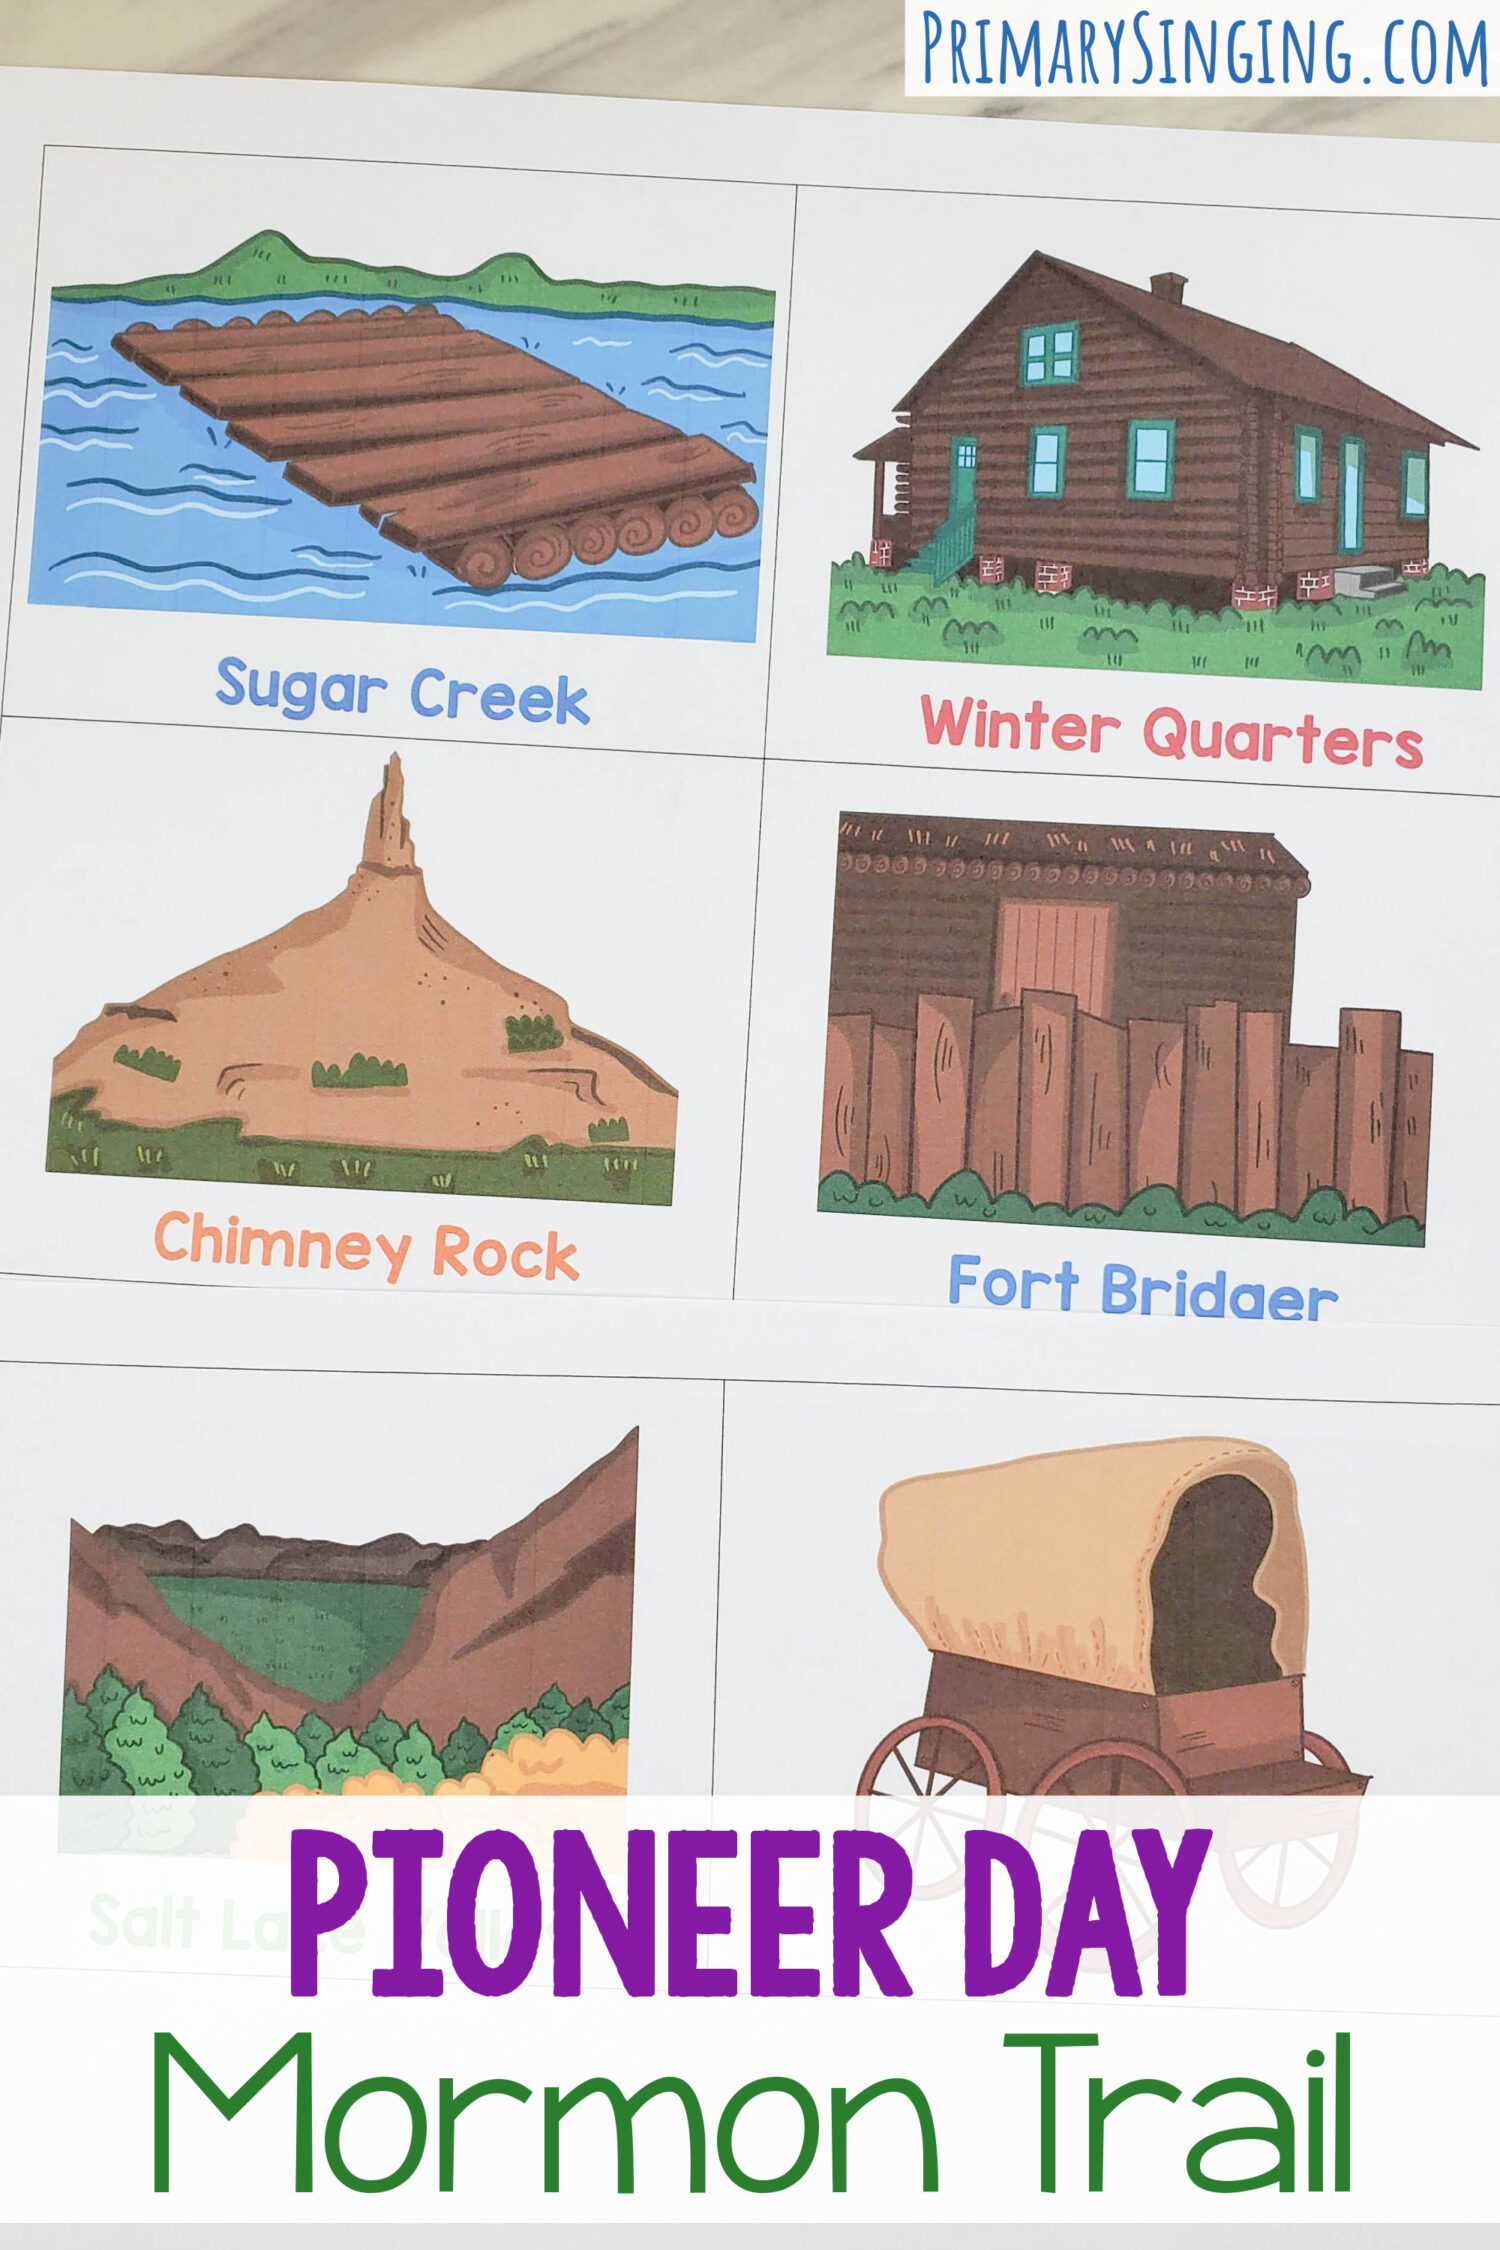 Pioneer Mormon Trail stops along the route fun Primary singing time review game to review all of your Primary Program songs or sing some fun Pioneer songs! Printables for LDS Primary Music Leaders.